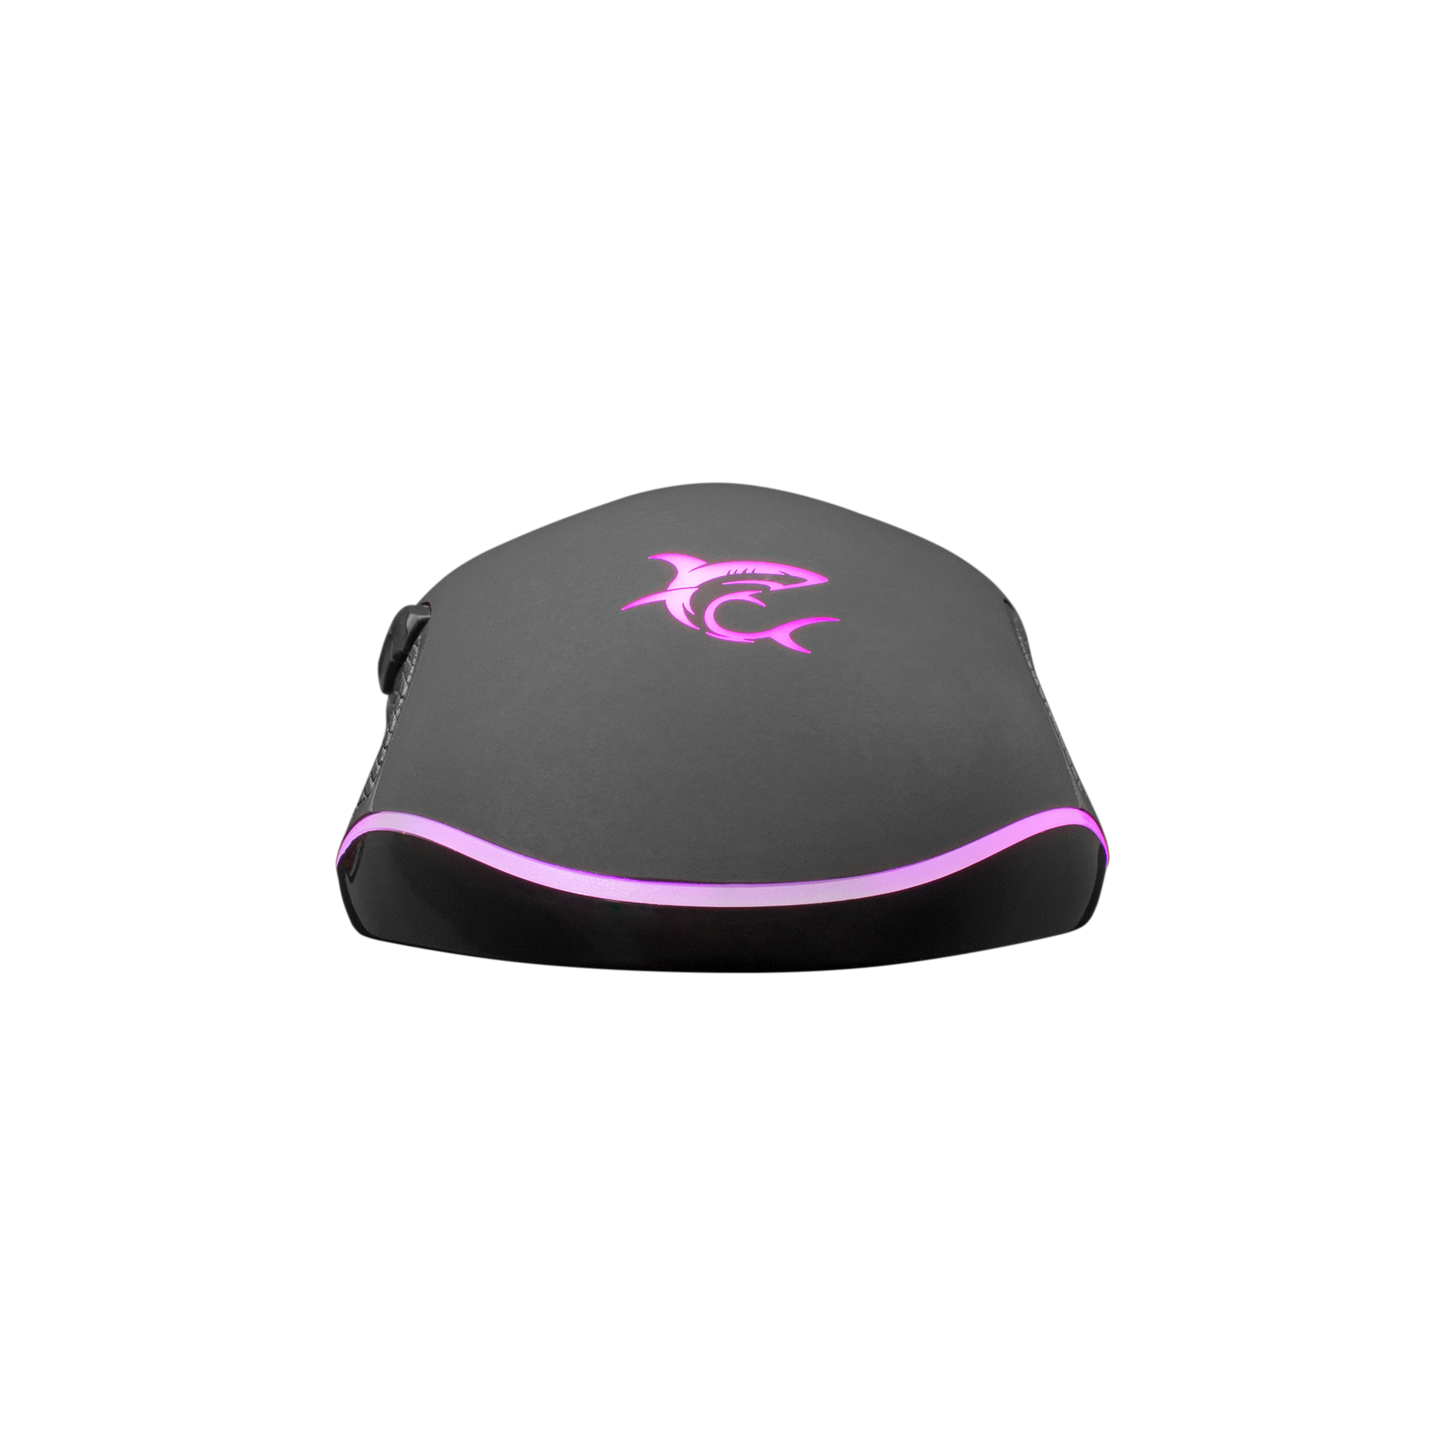 CYRUS - Gaming Mouse